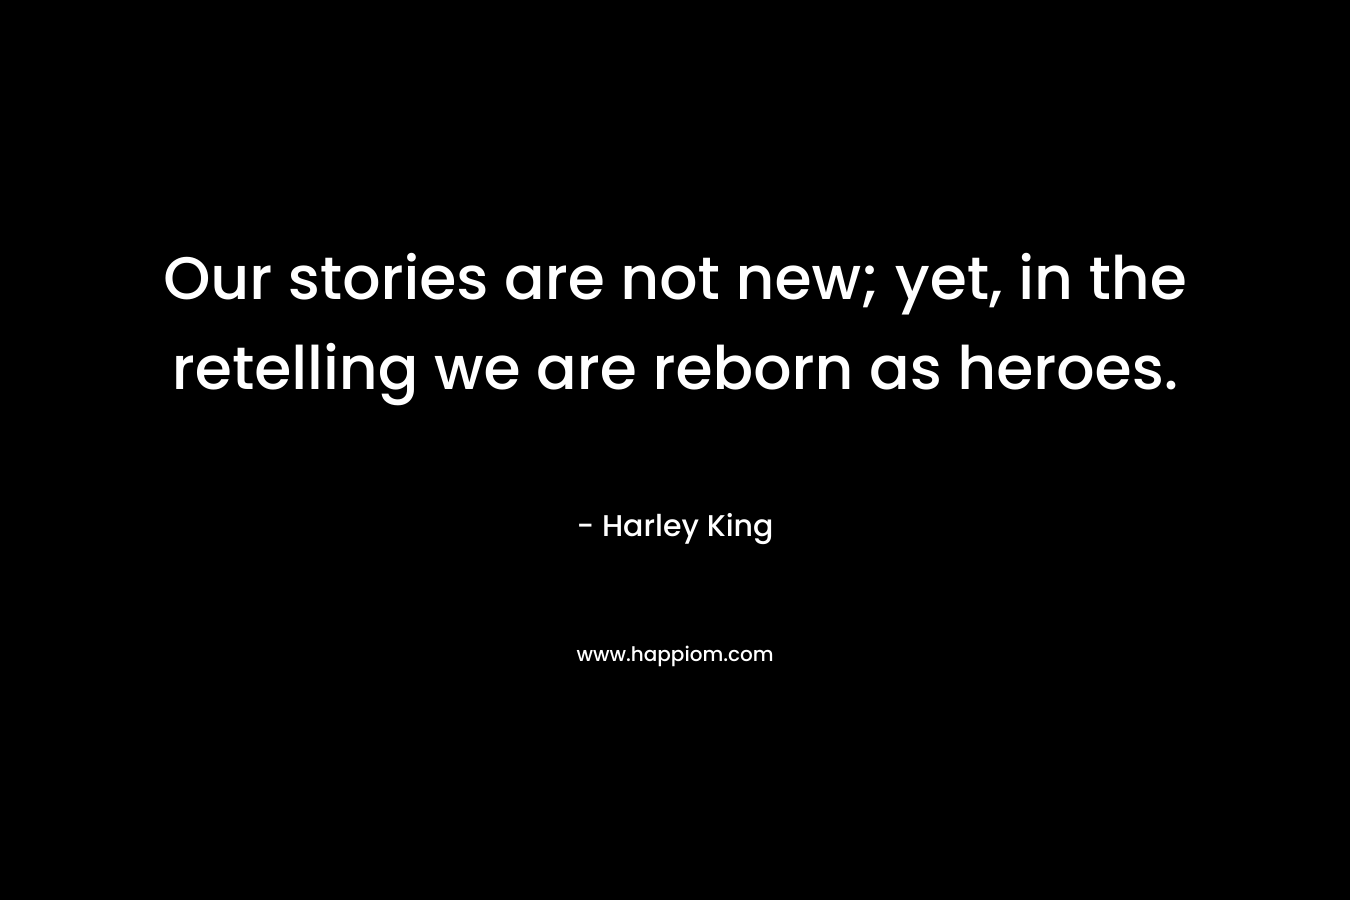 Our stories are not new; yet, in the retelling we are reborn as heroes. – Harley King